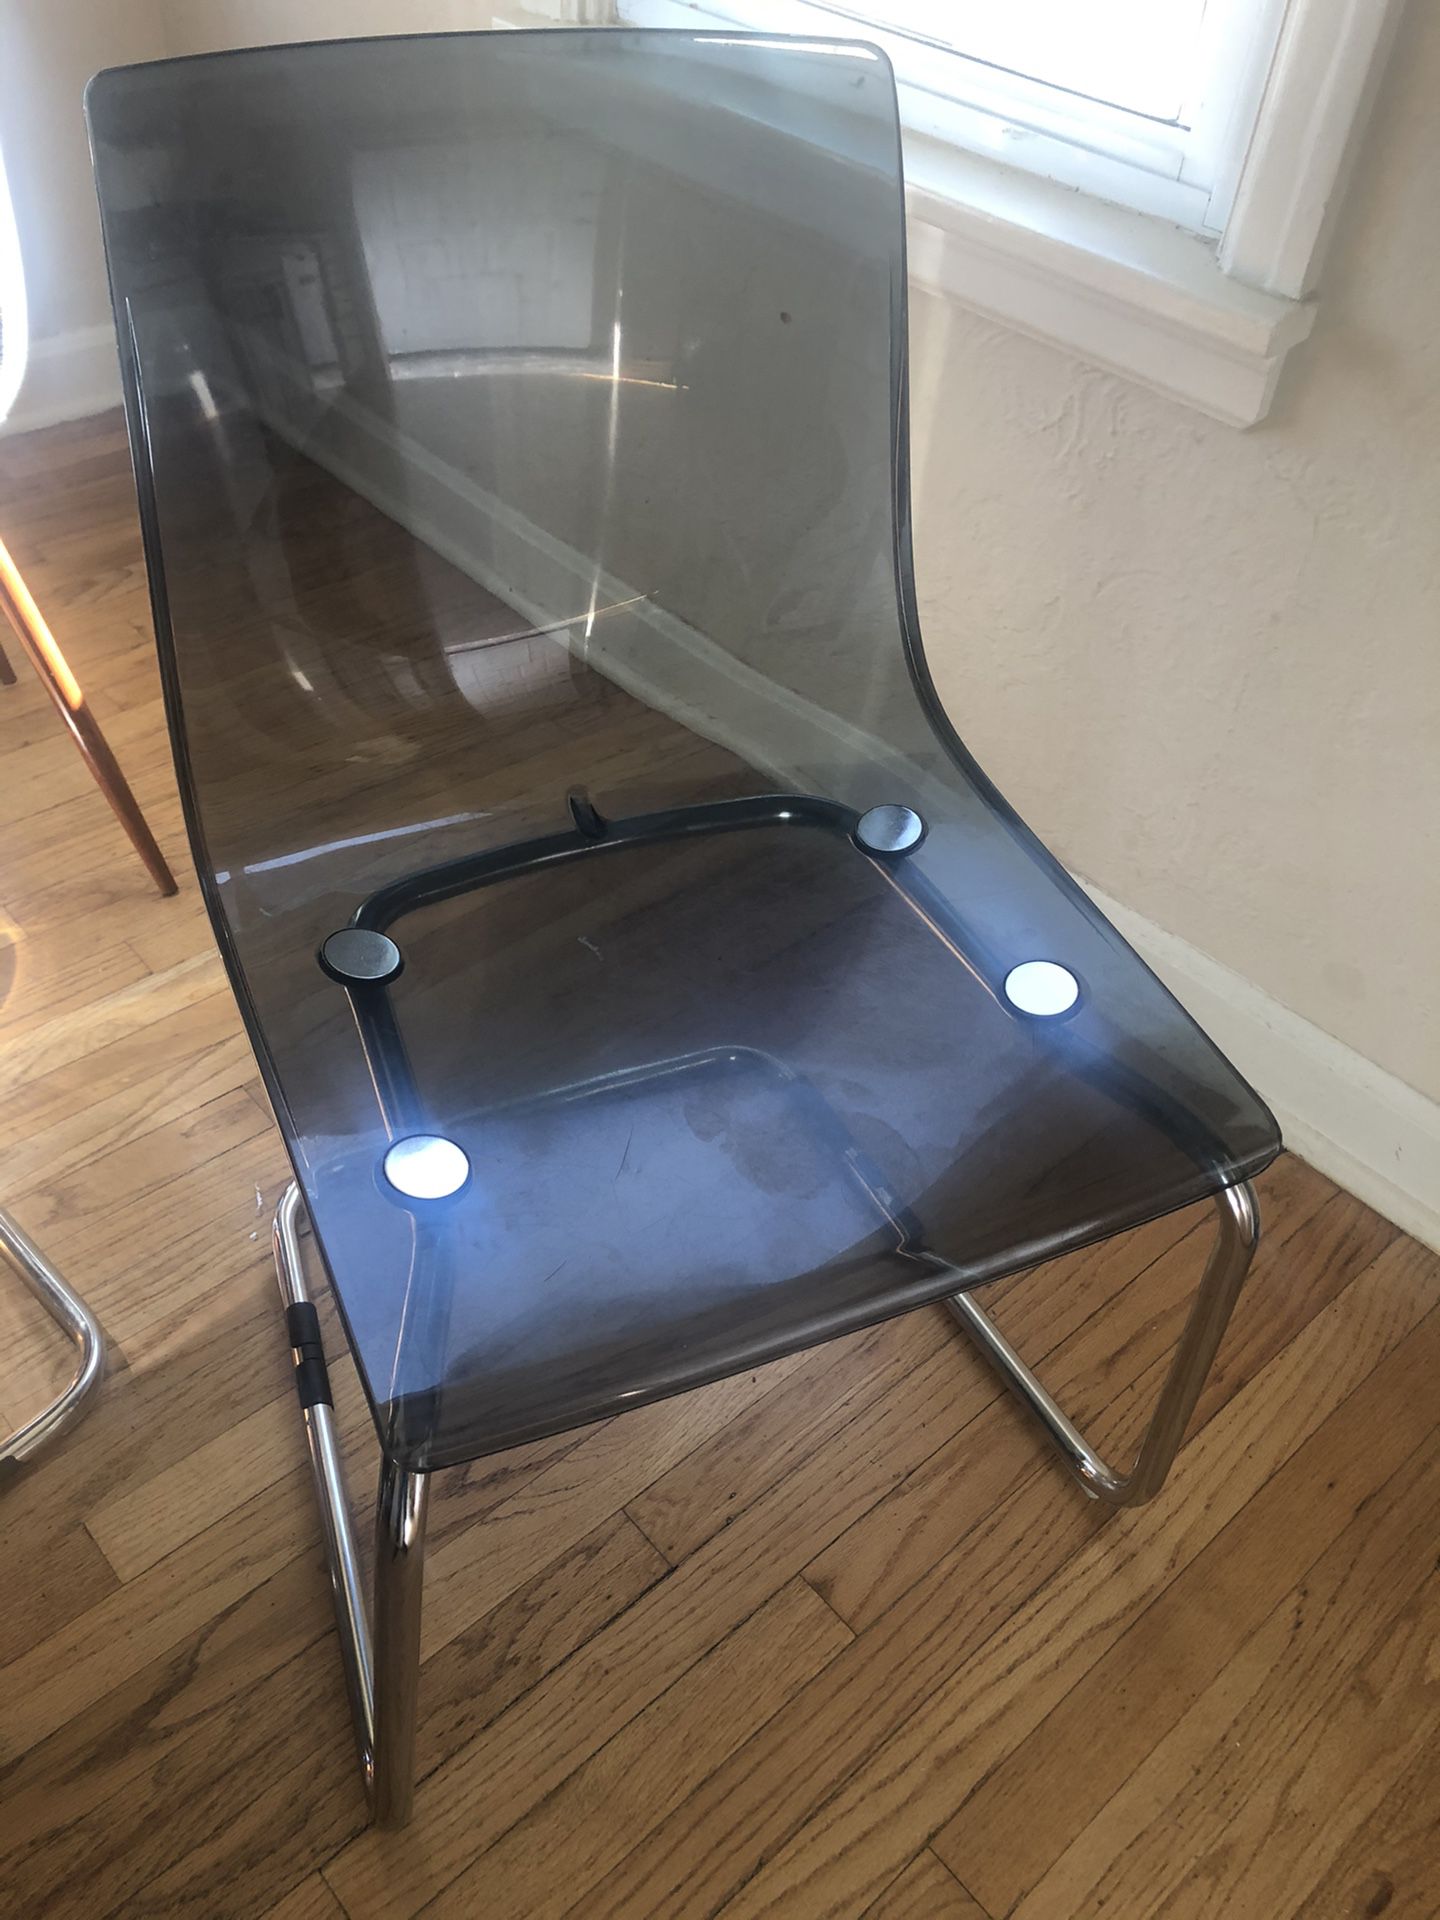 4 IKEA modern chairs - $55(for all)